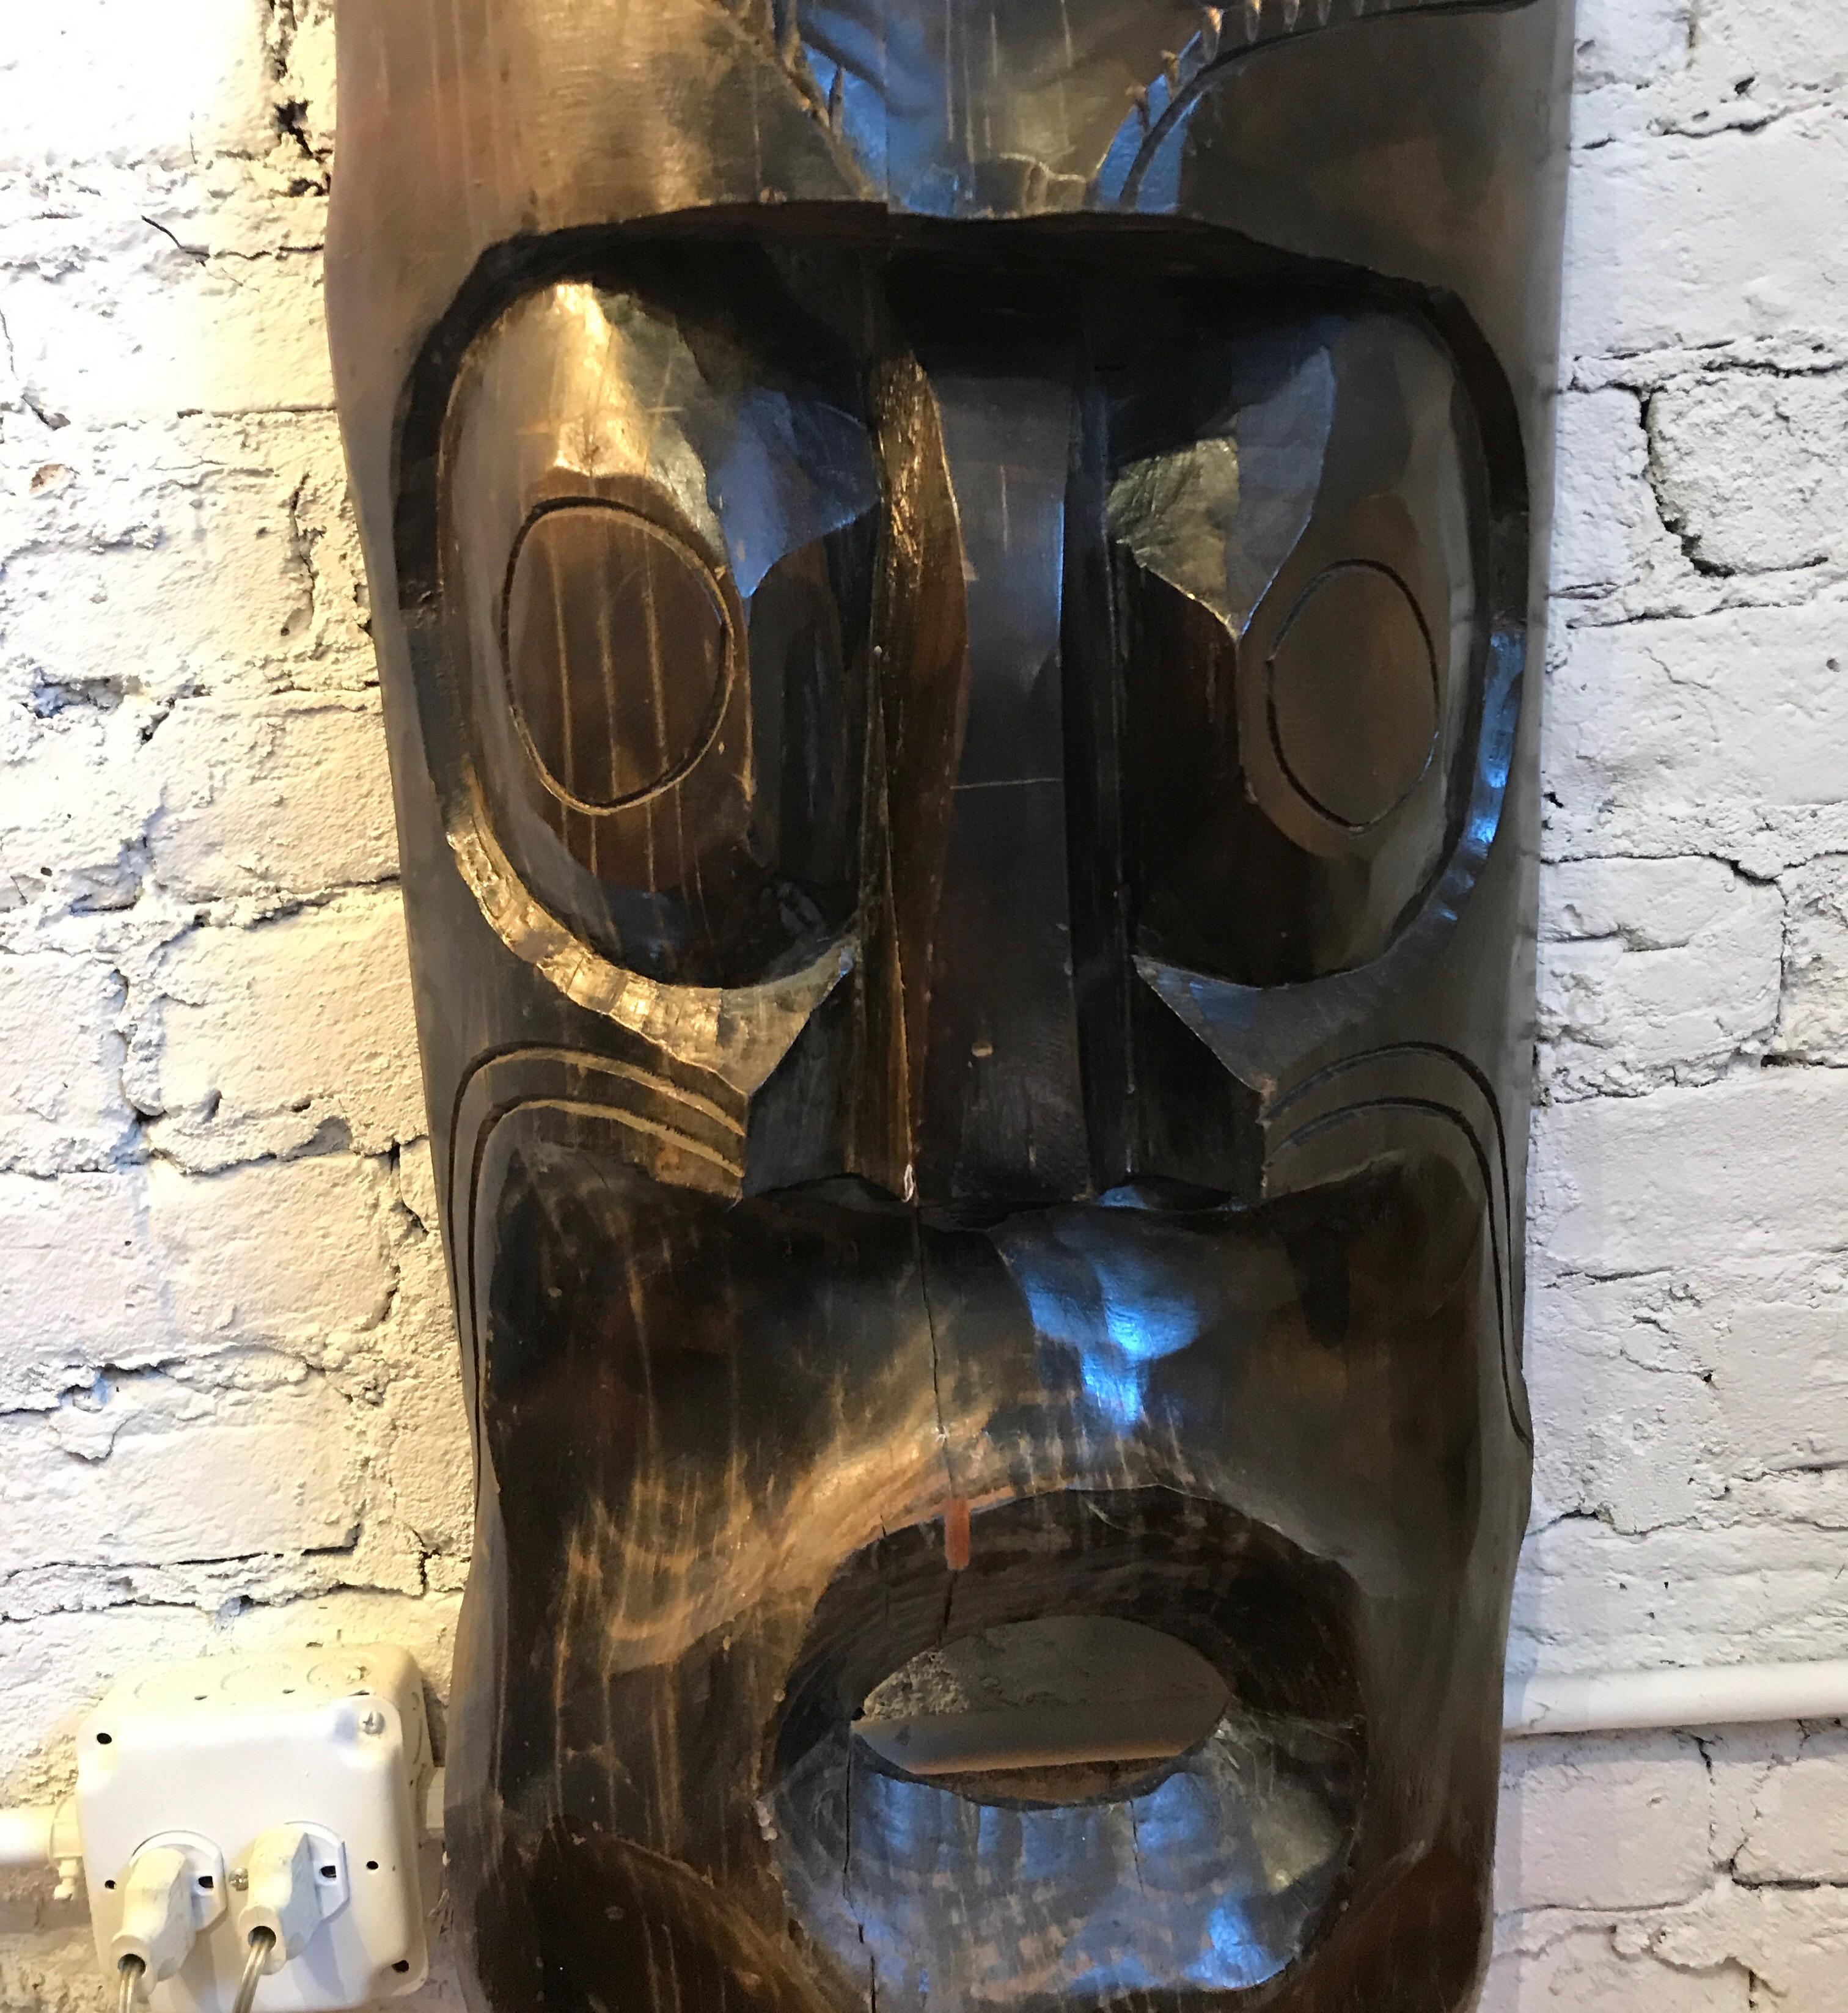 Large hand carved wood Tiki mask from Hawaii
Purchased in Hawaii in the 1960s.
Great decorative accent item for the home.